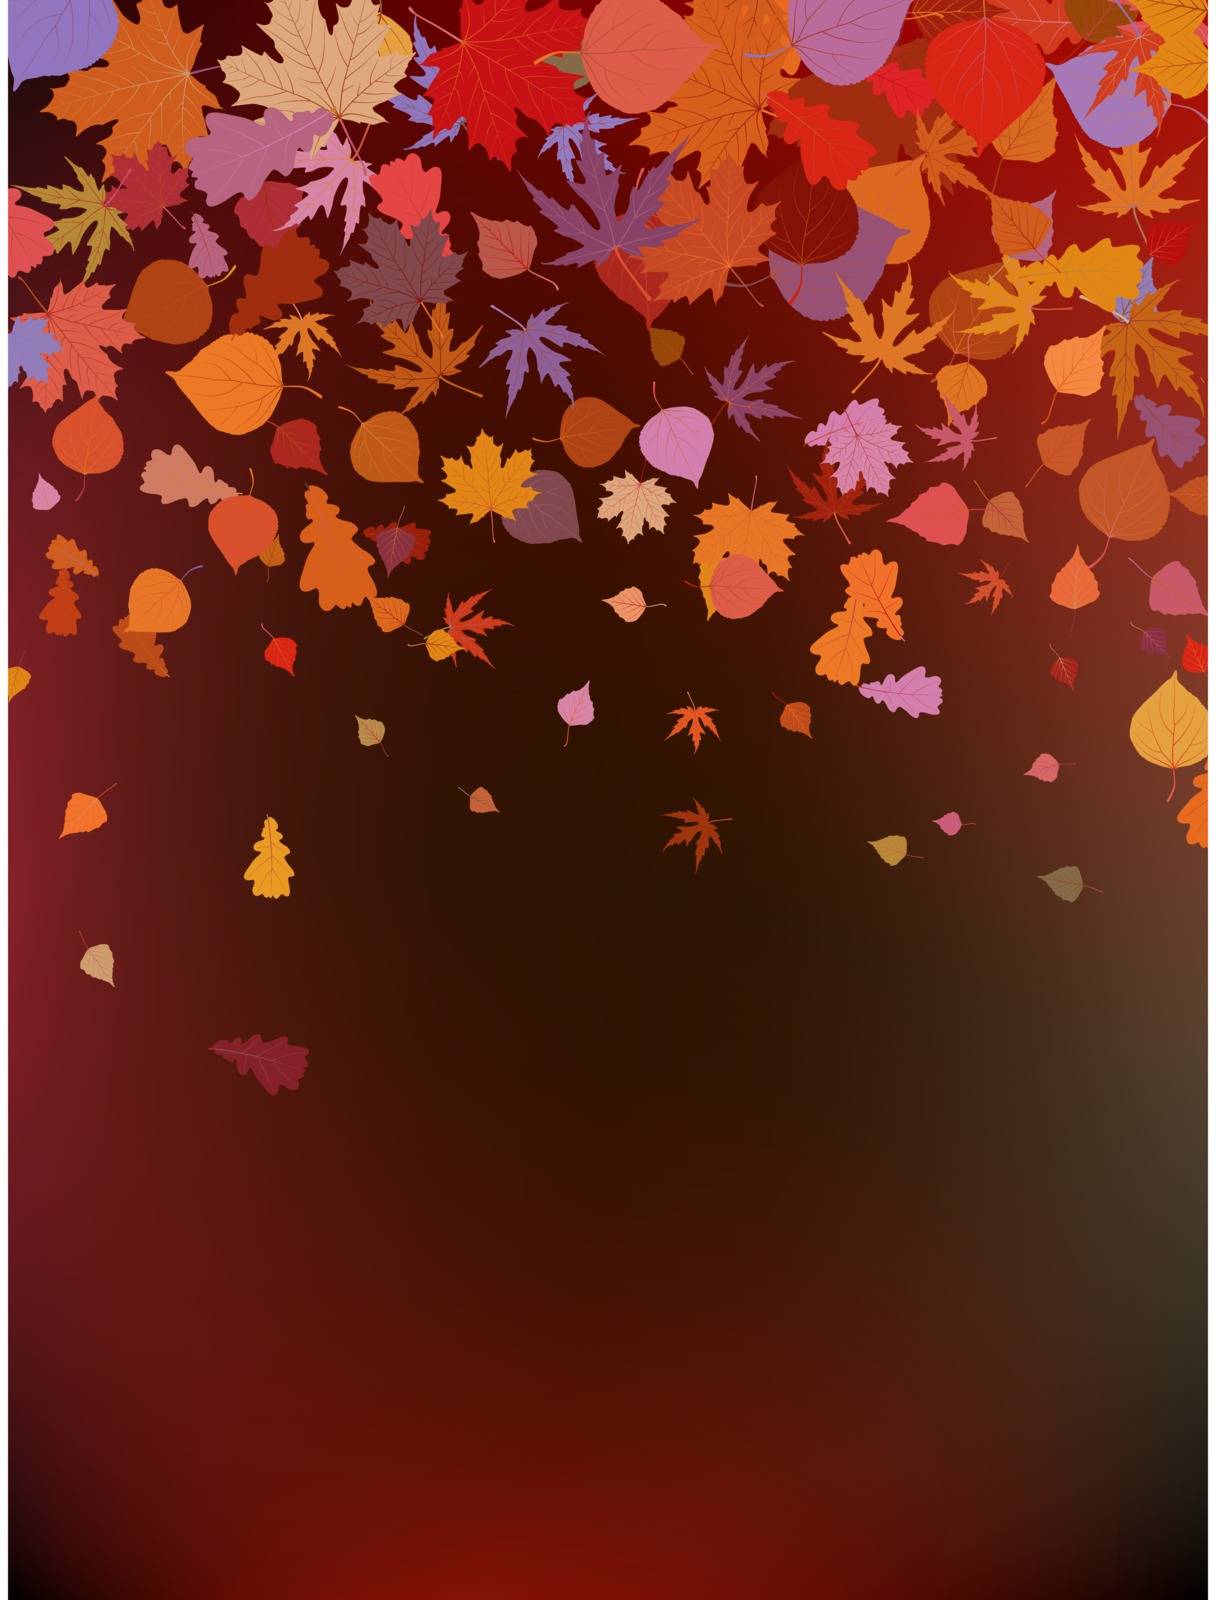 Brown autumnal background. EPS 8 vector file included